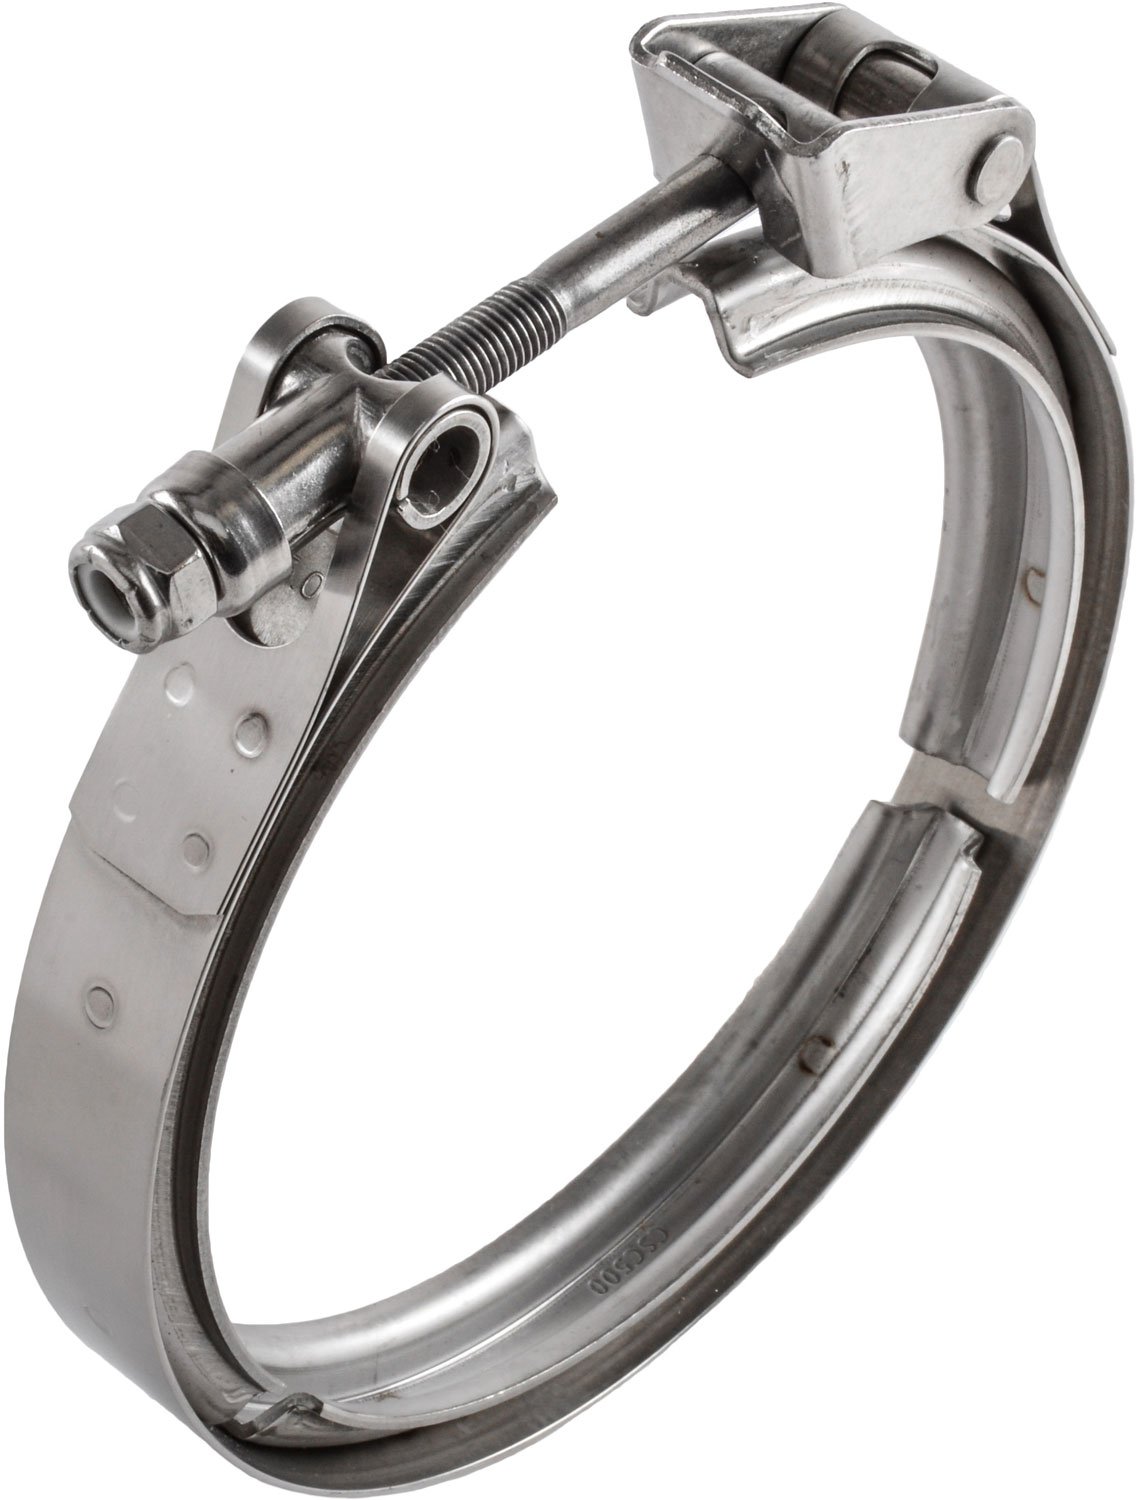 Stainless Steel Quick Release V-Band Clamp 5 in.